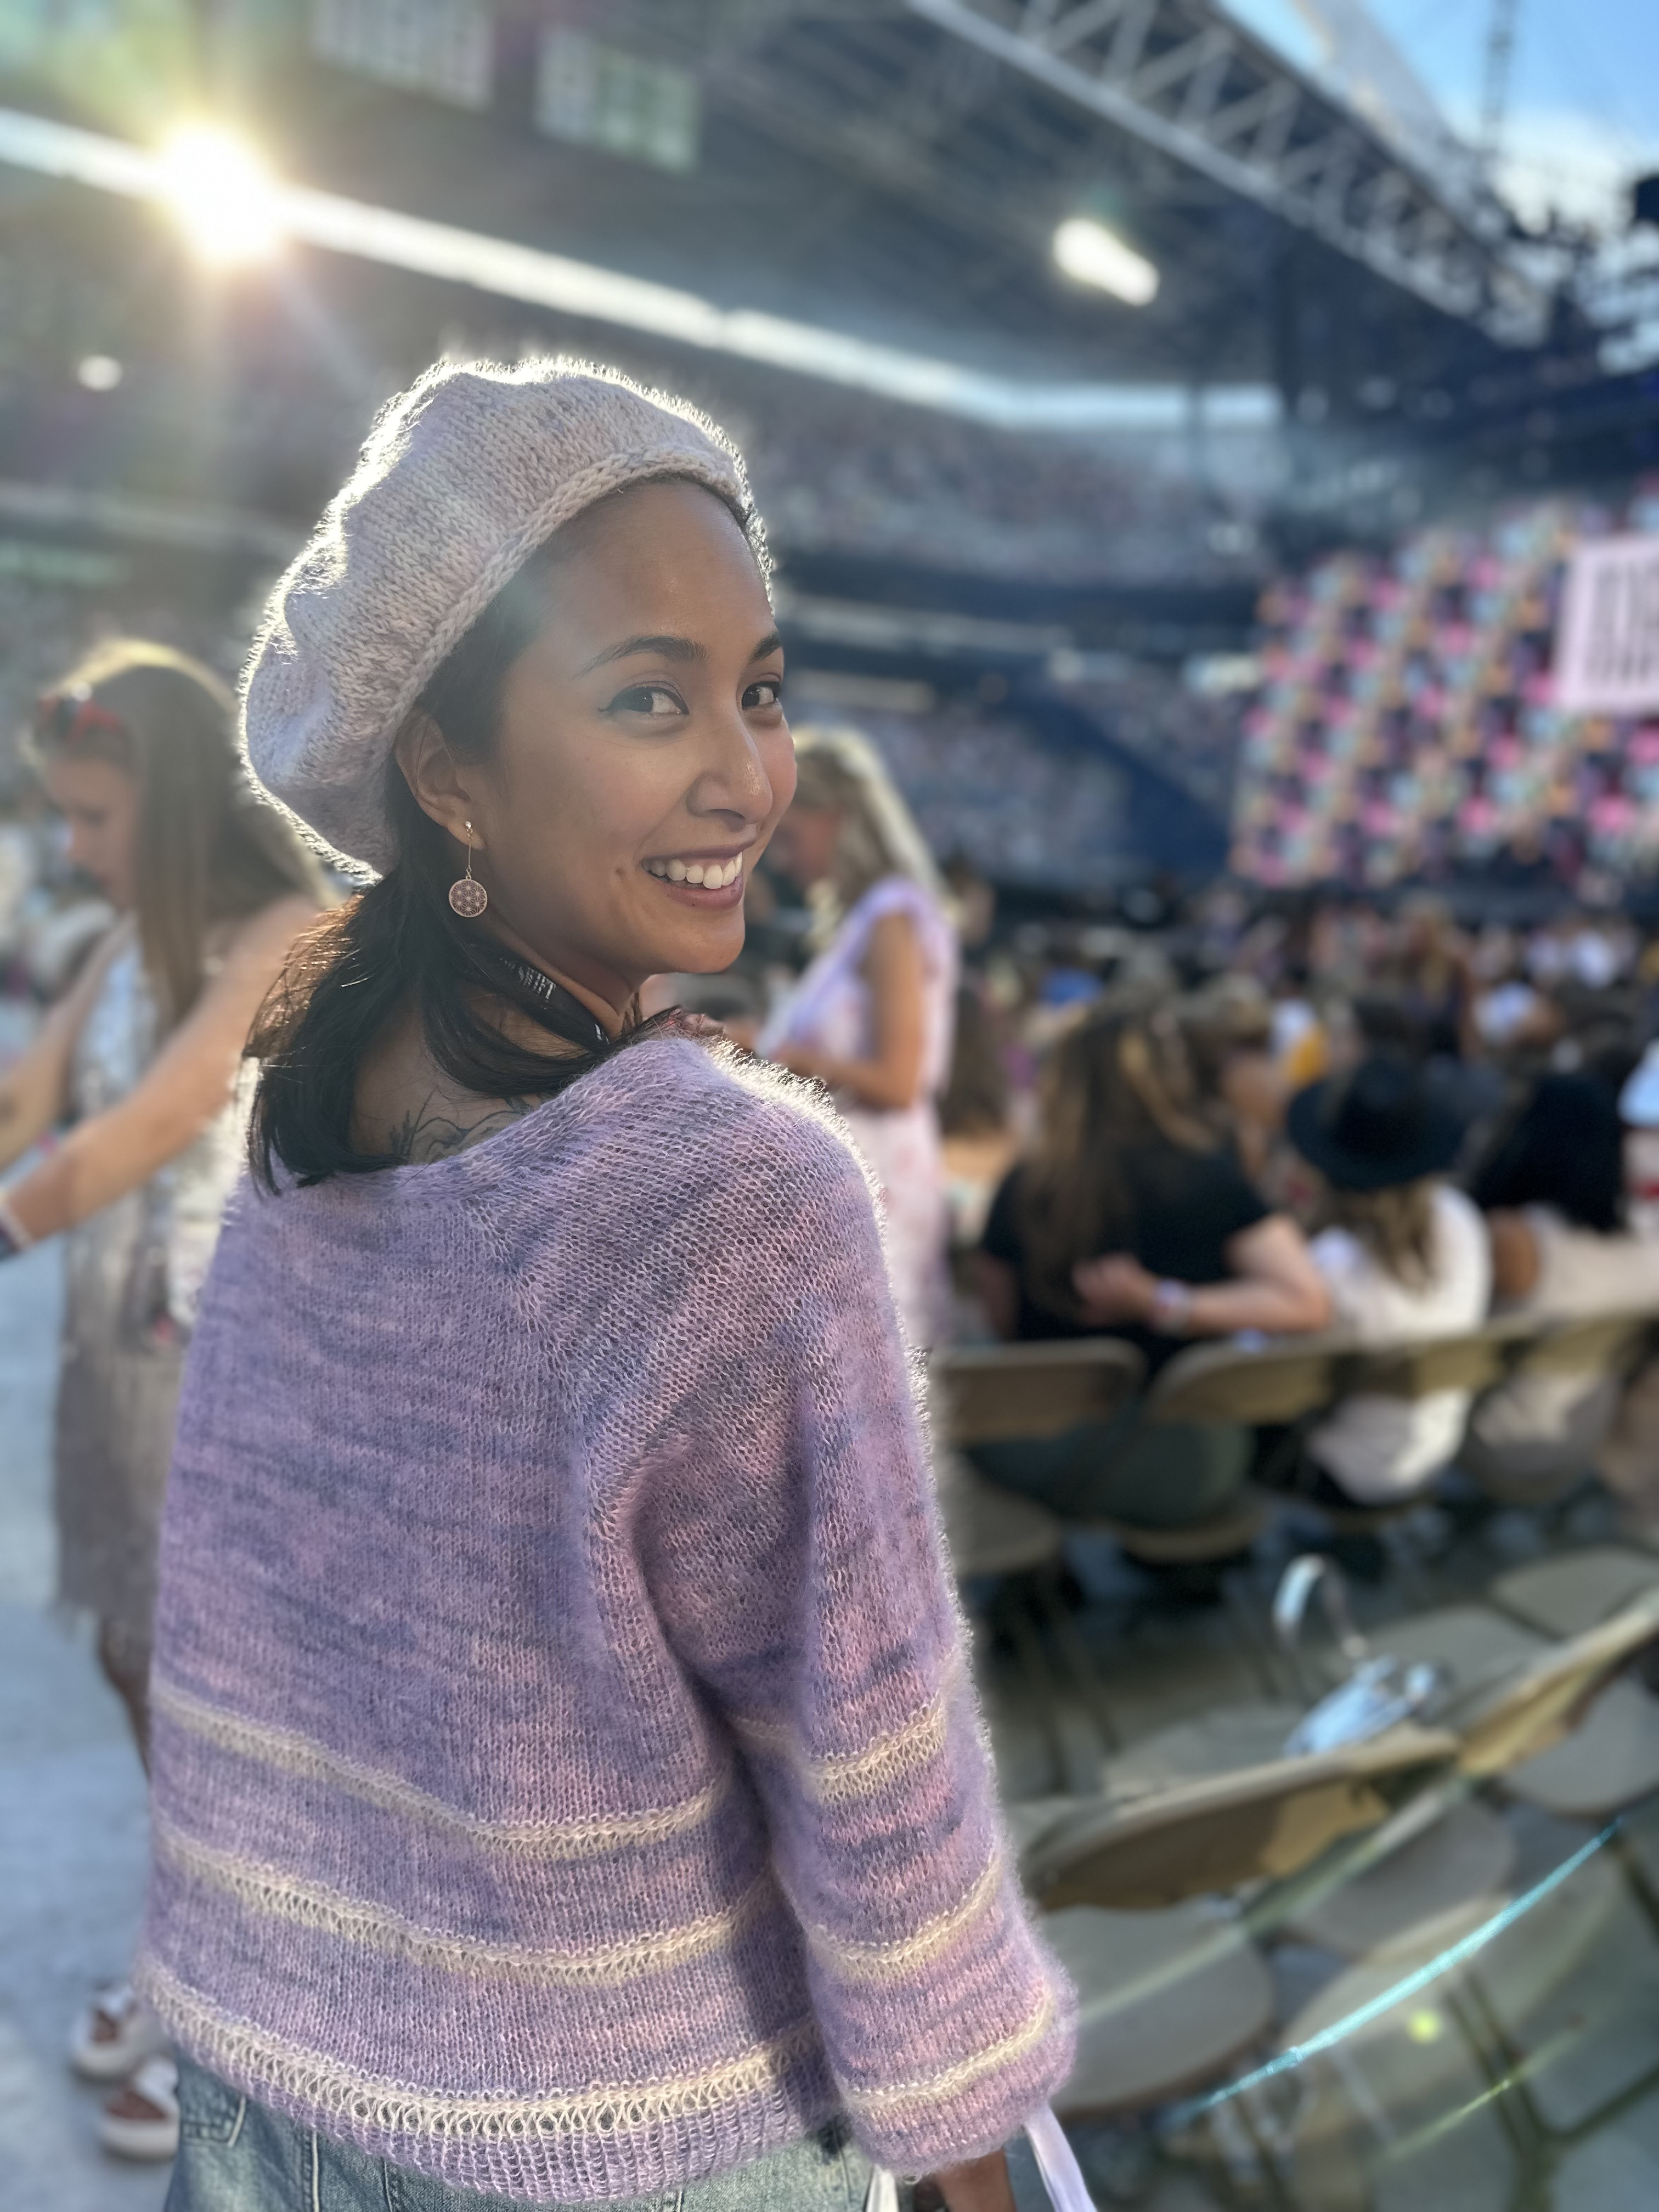 Arisa from behind with her face smiling at the camera. She's where a beret and cardigan in pink, purple, and white at the Taylor Swift concert